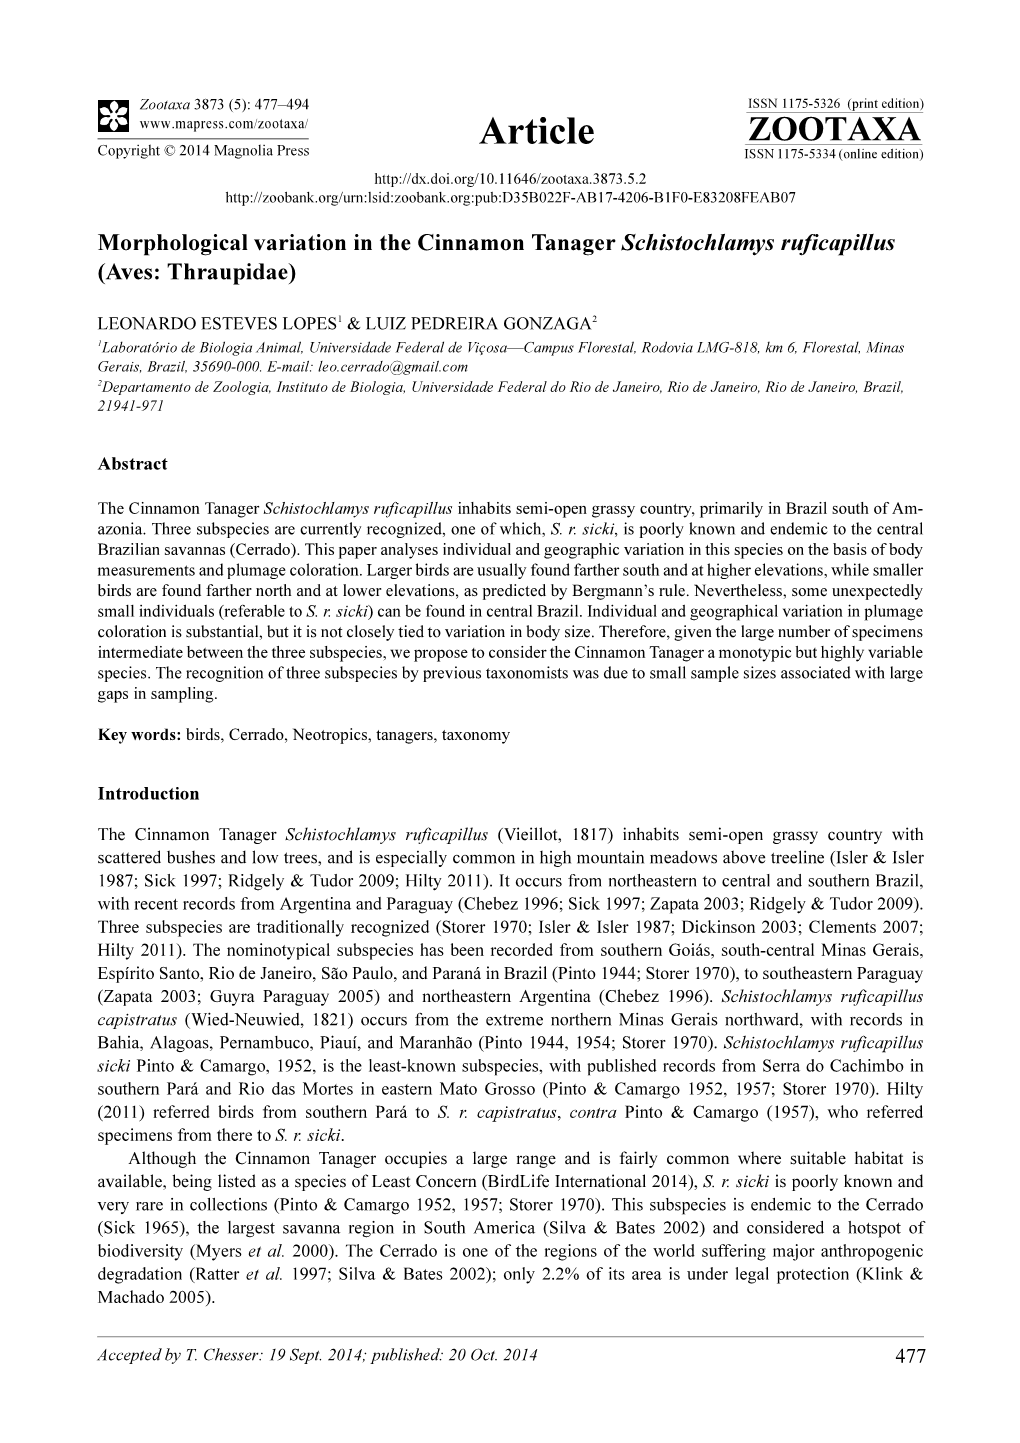 Morphological Variation in the Cinnamon Tanager Schistochlamys Ruficapillus (Aves: Thraupidae)